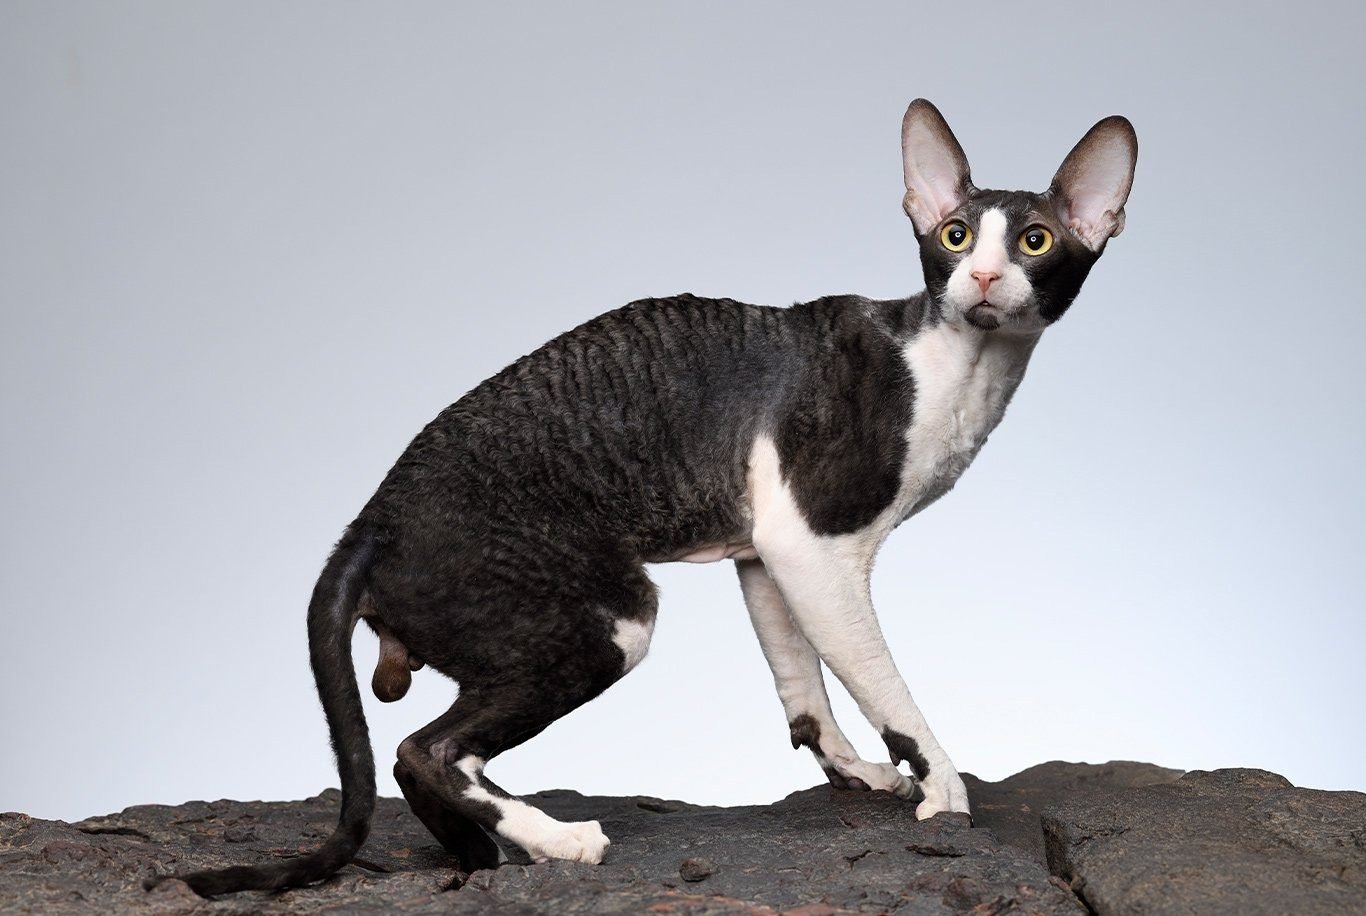 10 Black and White Cat Breeds You Should Know About contain: Cornish Rex